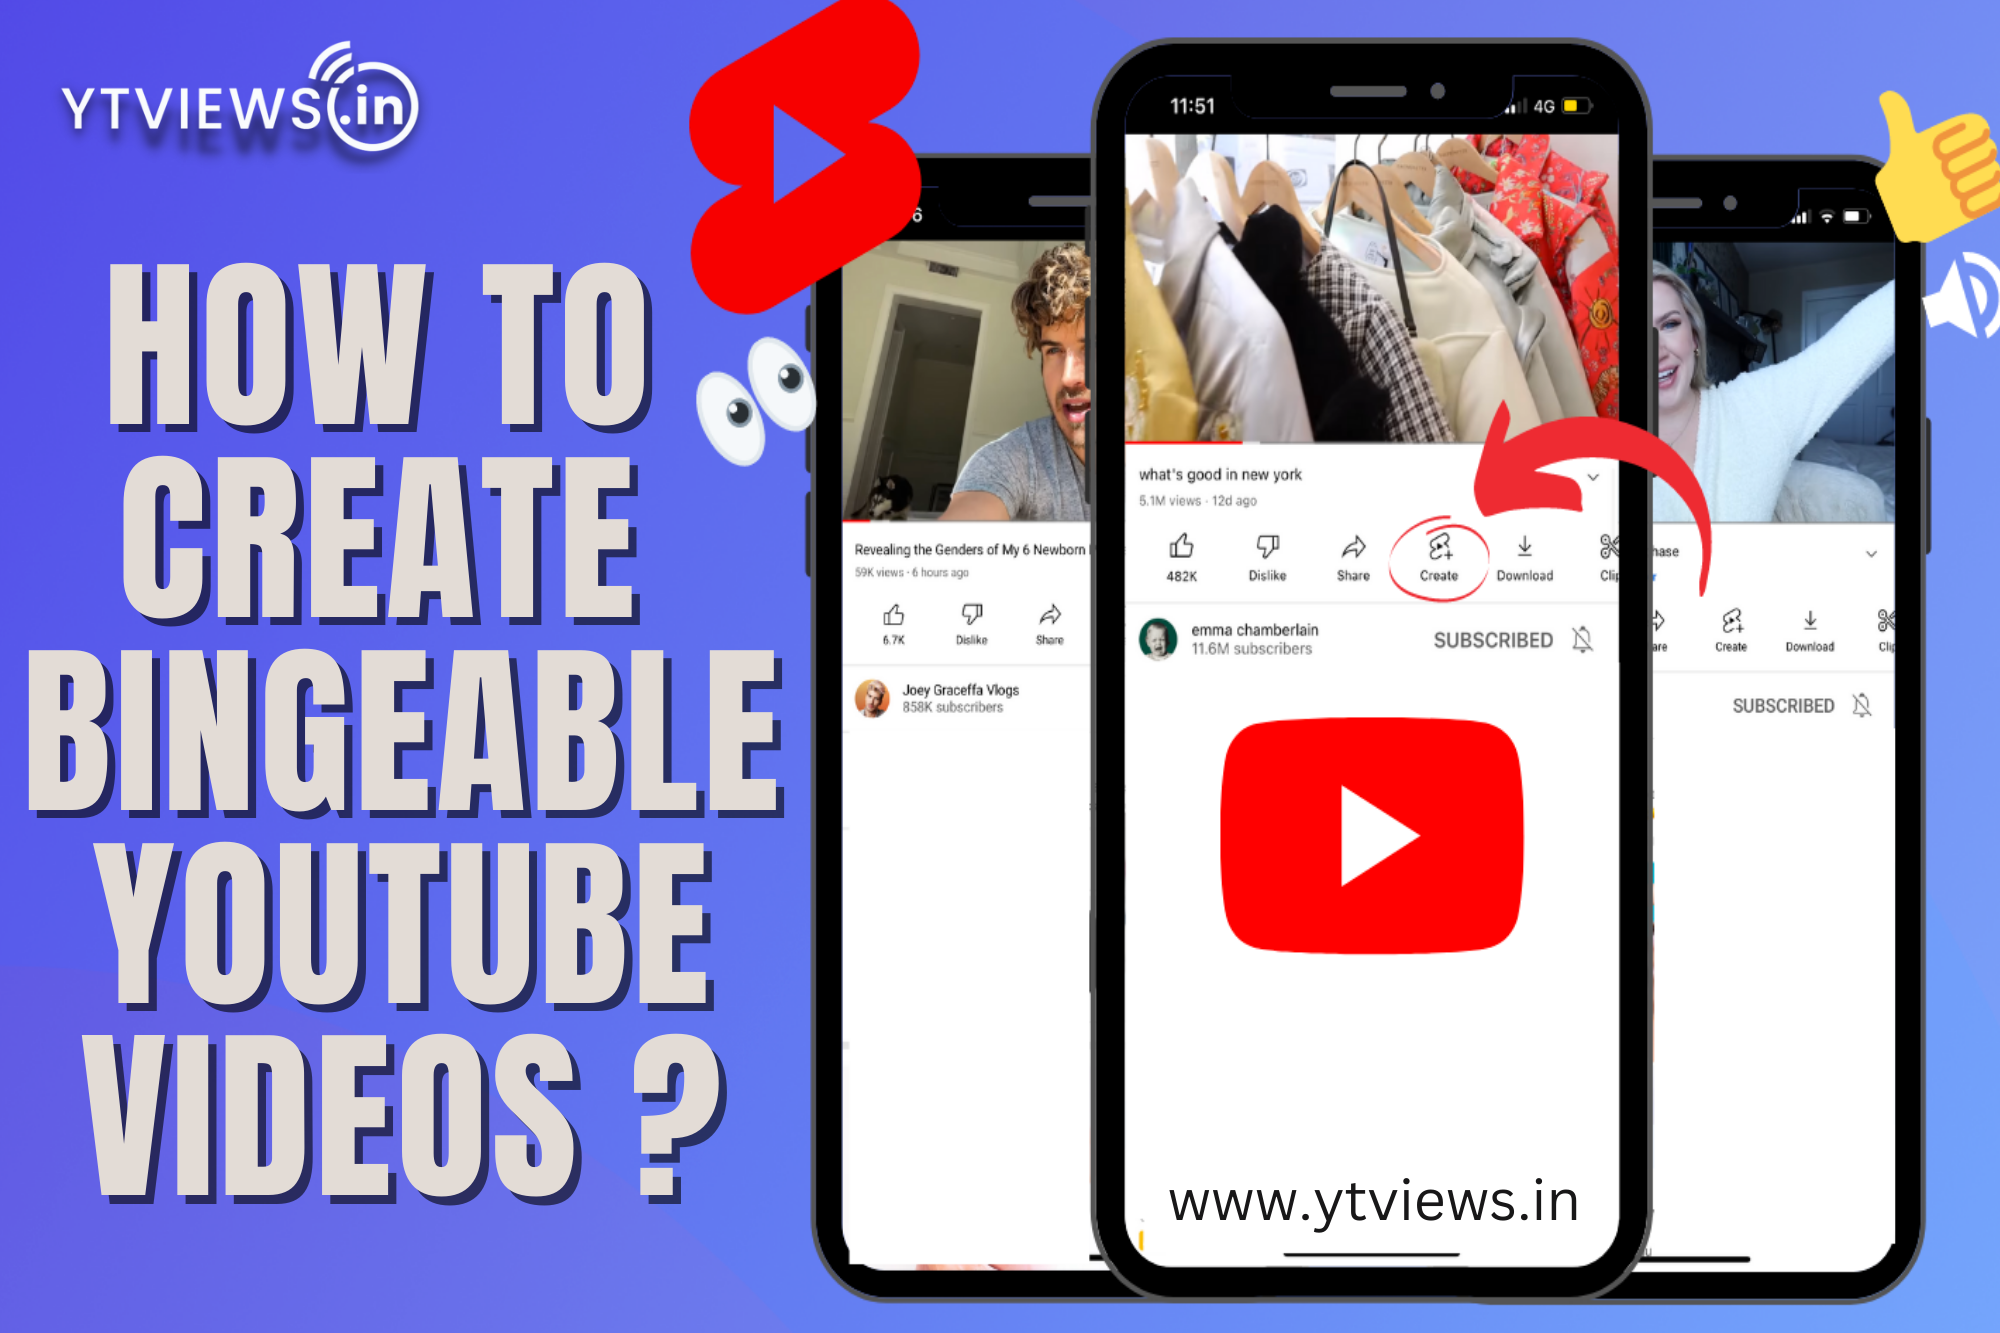 How to create bingeable YouTube videos